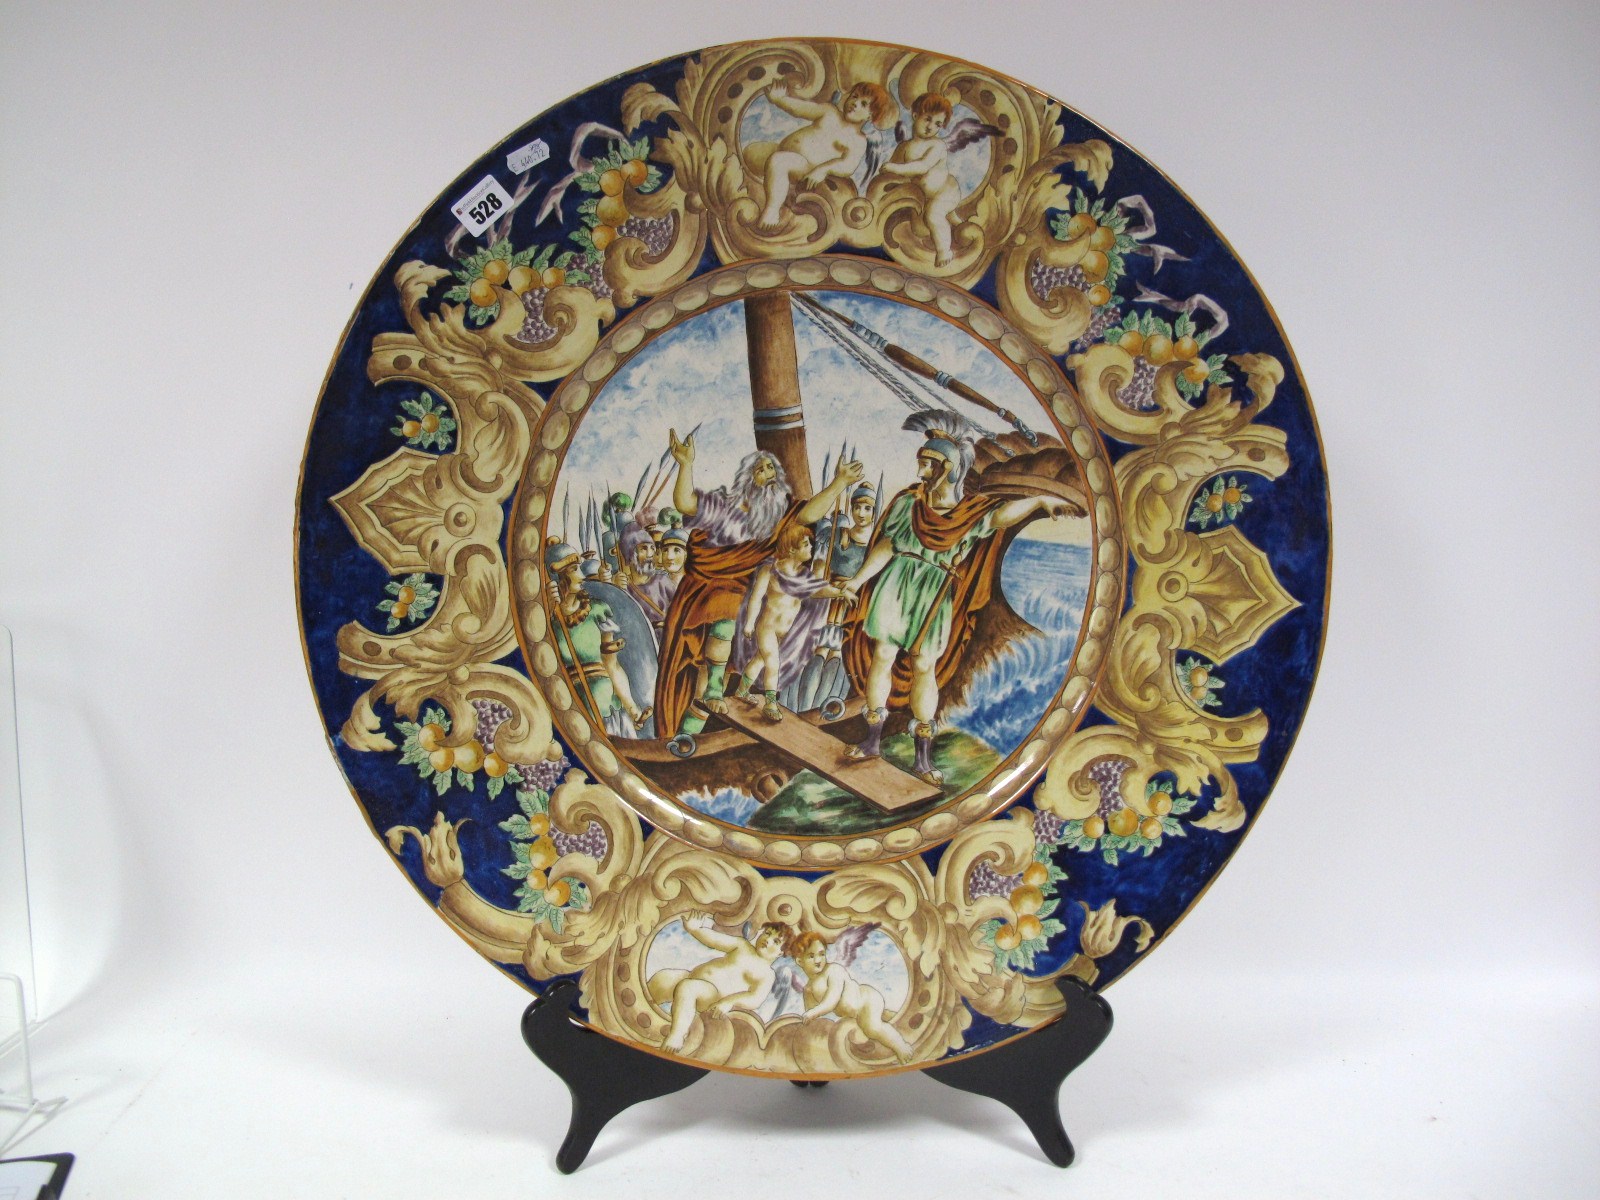 A Late XIX Century Italian Majolica Circular Charger, polychrome painted with a mythological